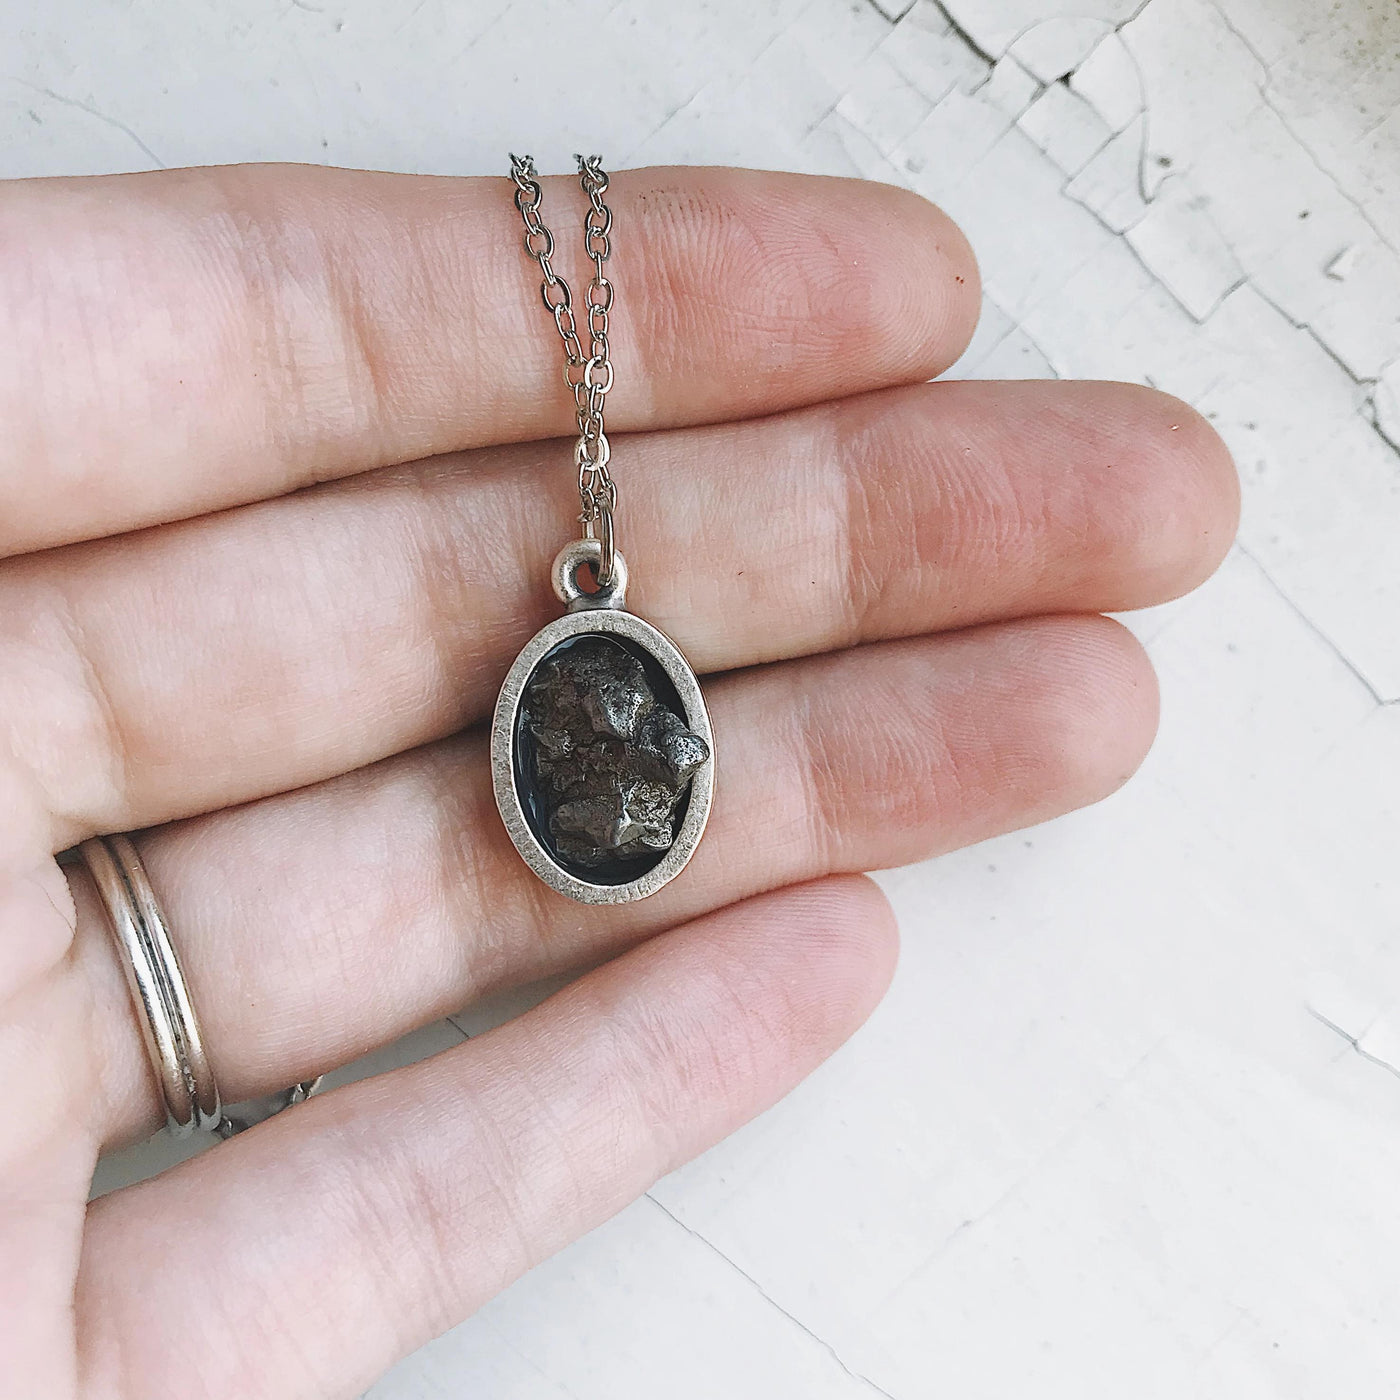 Oval Raw Meteorite Pendant Necklace in Matte Brushed Silver - Roses & Chains | Fashionable Clothing, Shoes, Accessories, & More